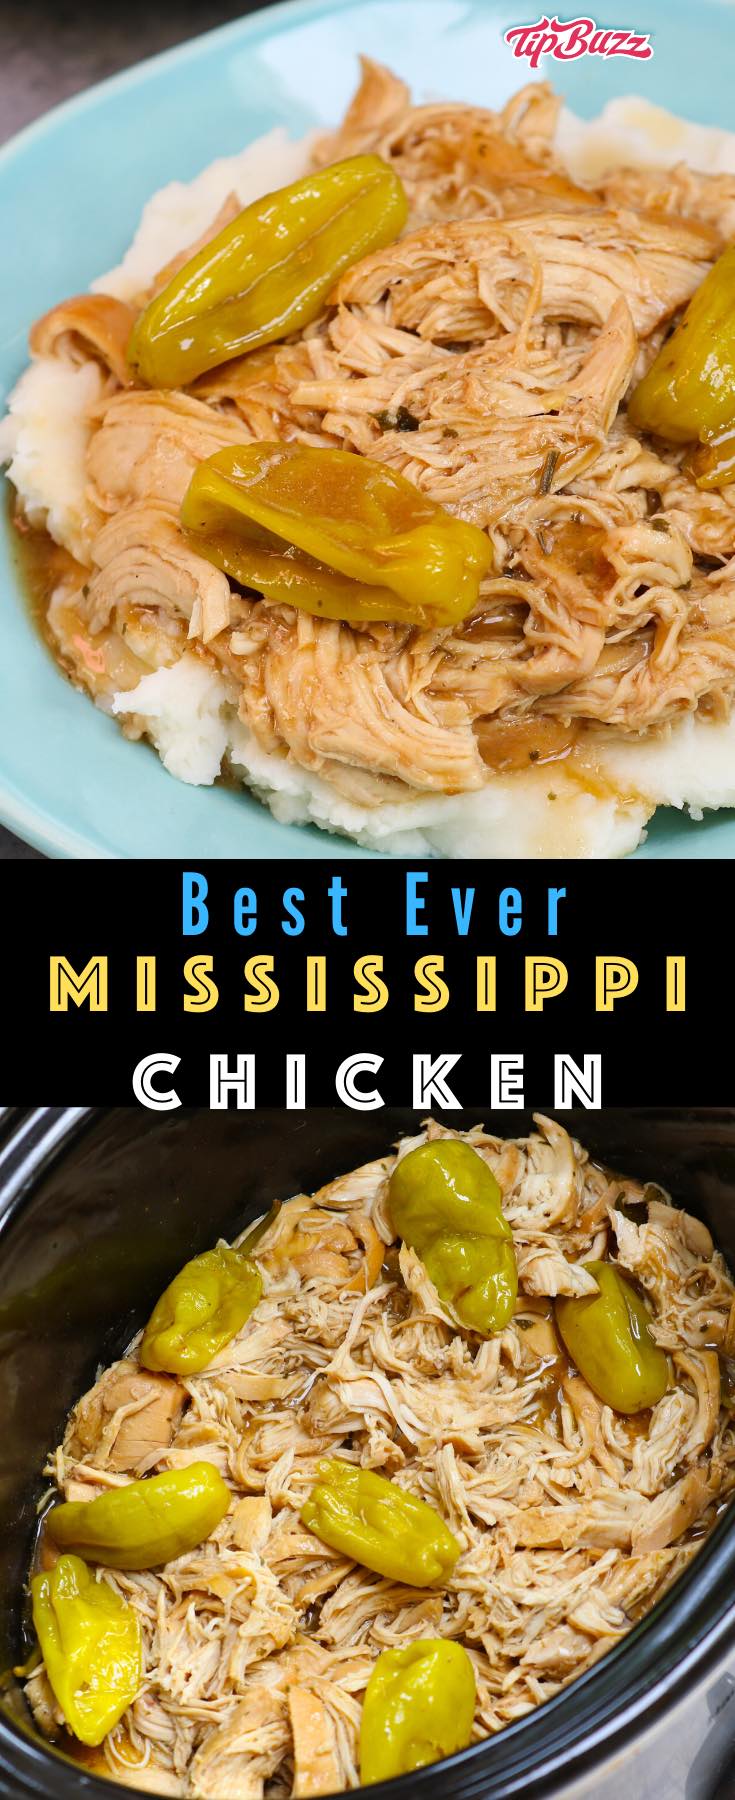 Mississippi Chicken is an easy crockpot recipe with just 5 minutes of prep time and 5 ingredients, delicious served with mashed potatoes or on a bun #mississippichicken